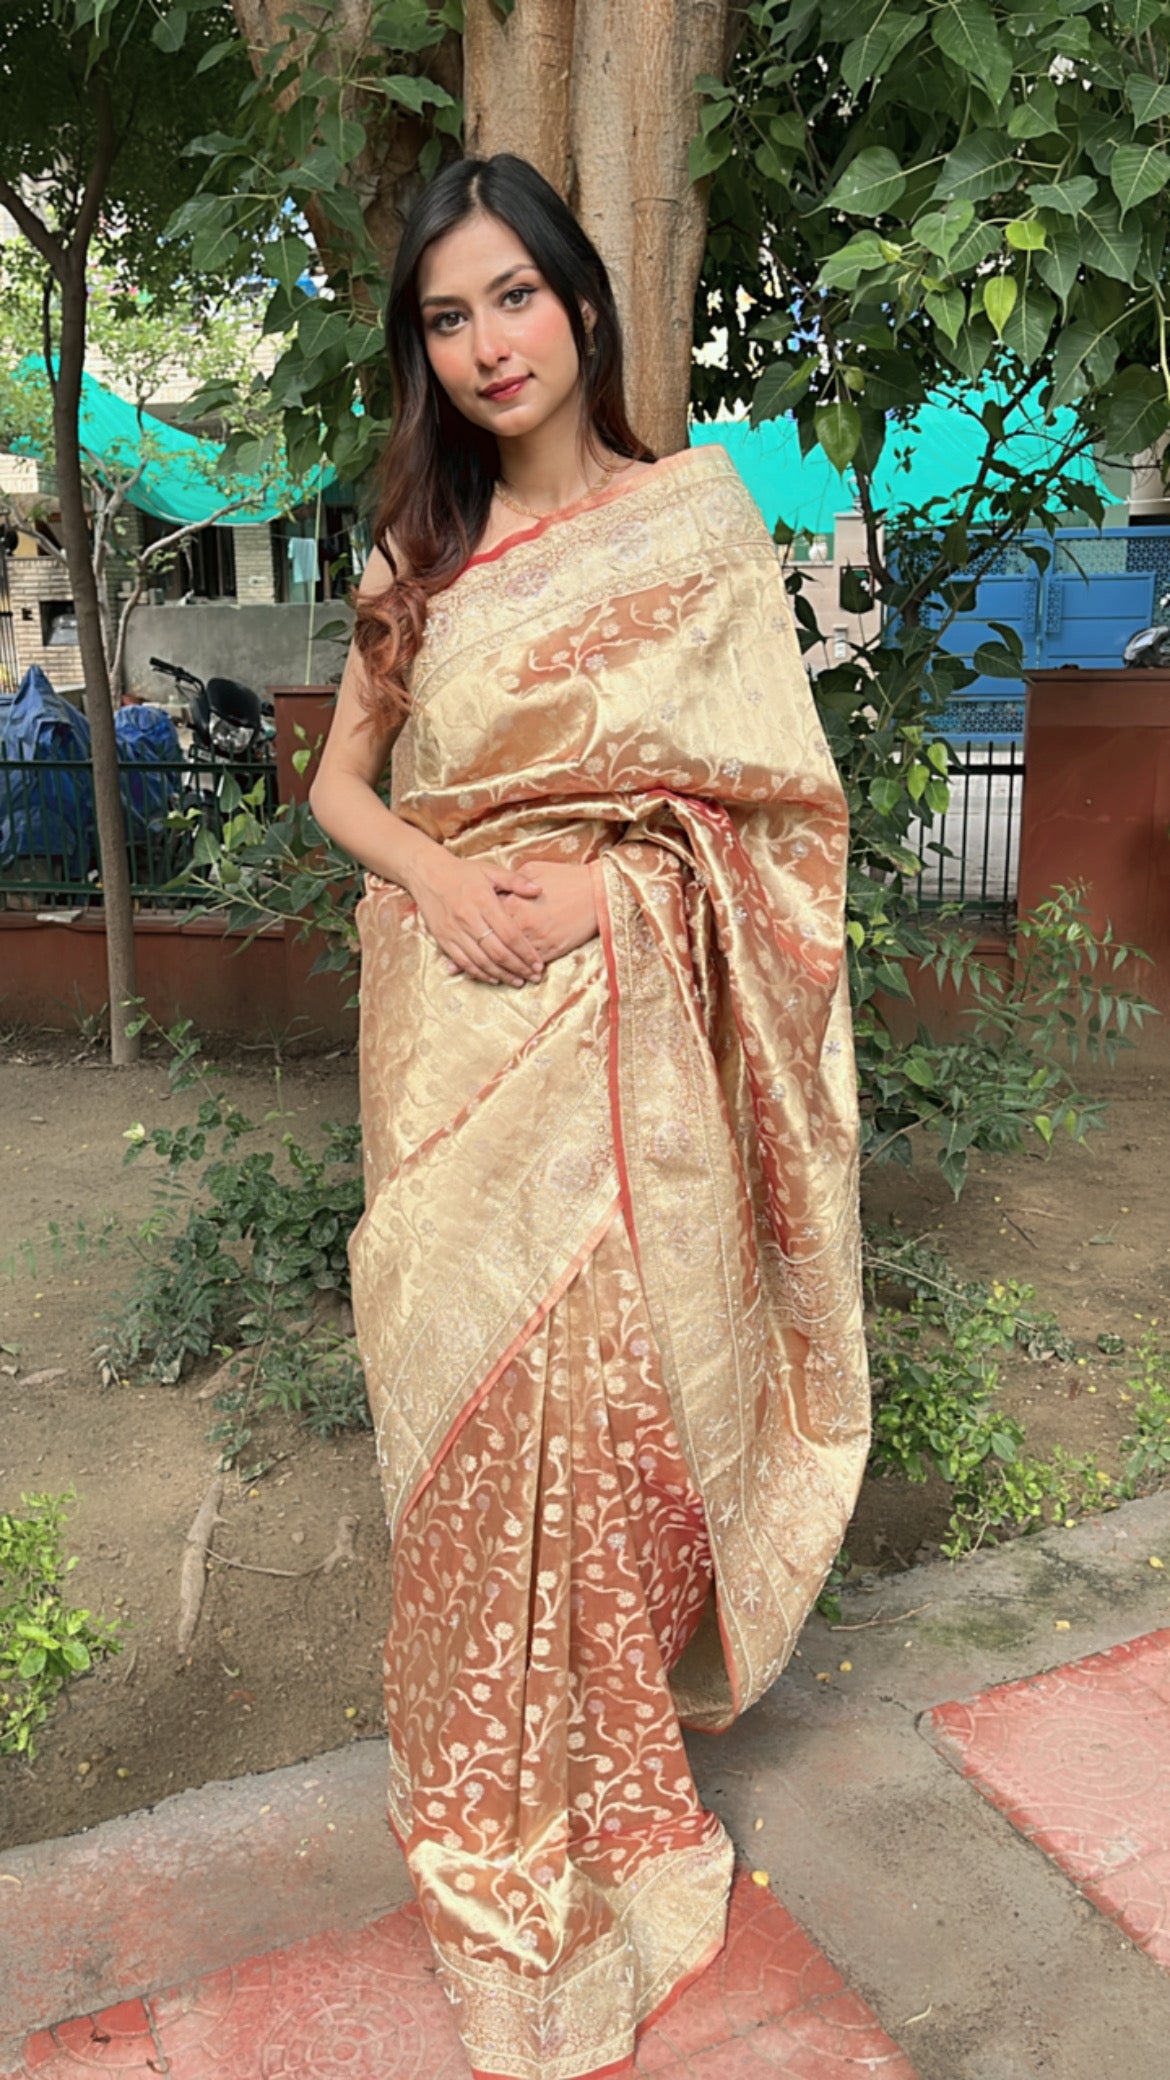 Desert Brown Saree Made In Georgette With Cut Dana And Zardosi Embroidery |  Saree, Georgette sarees, Fashion